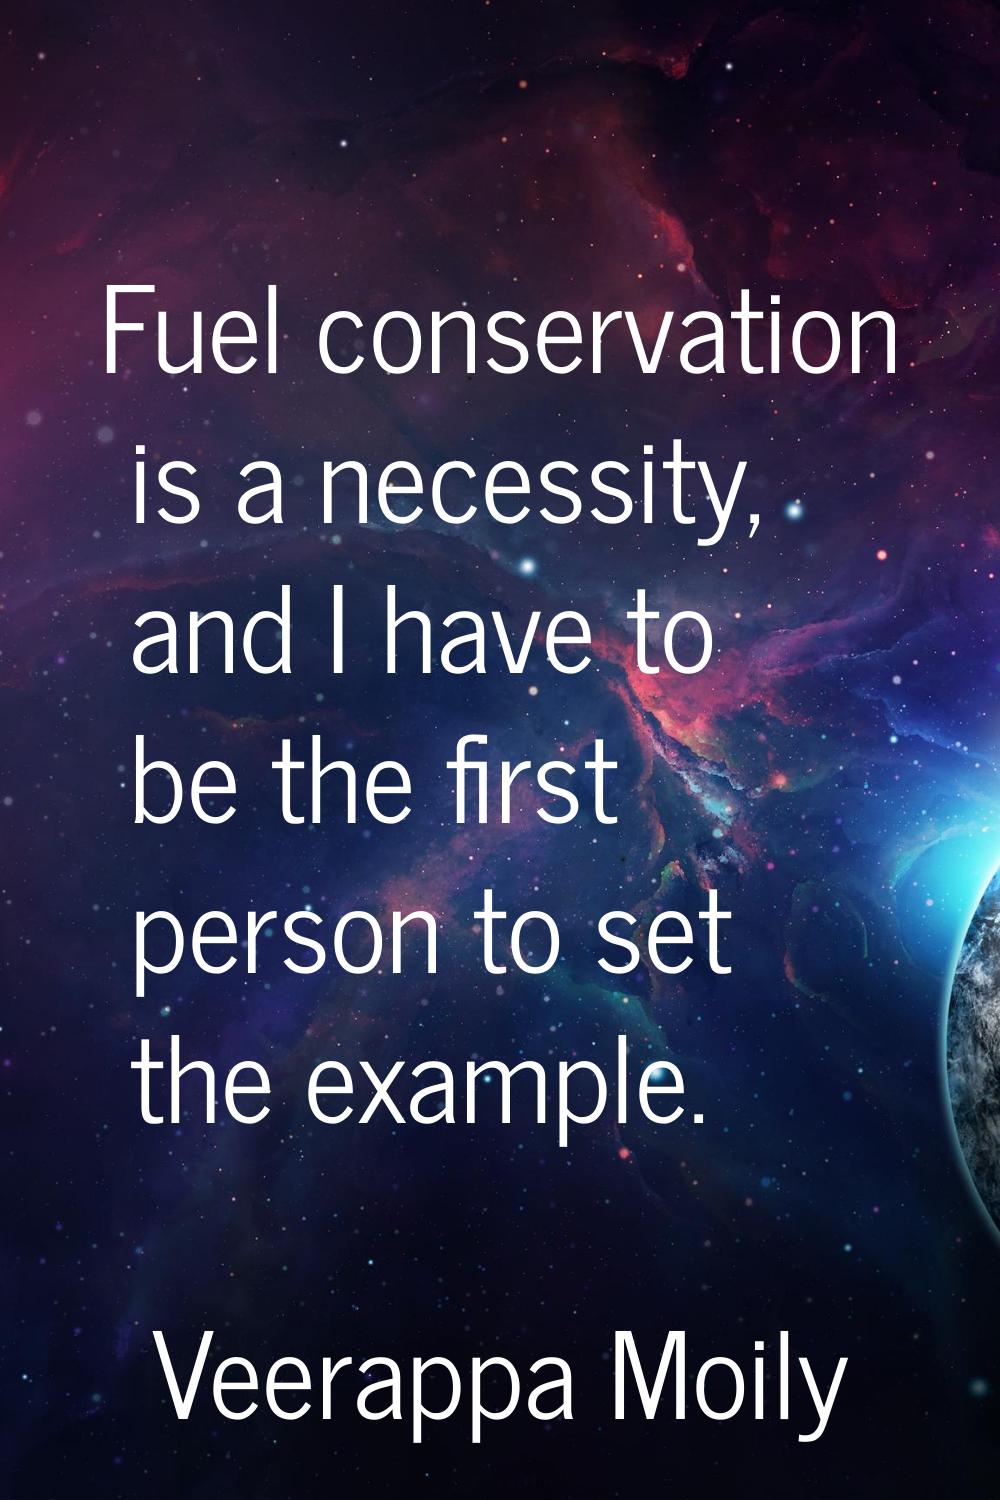 Fuel conservation is a necessity, and I have to be the first person to set the example.